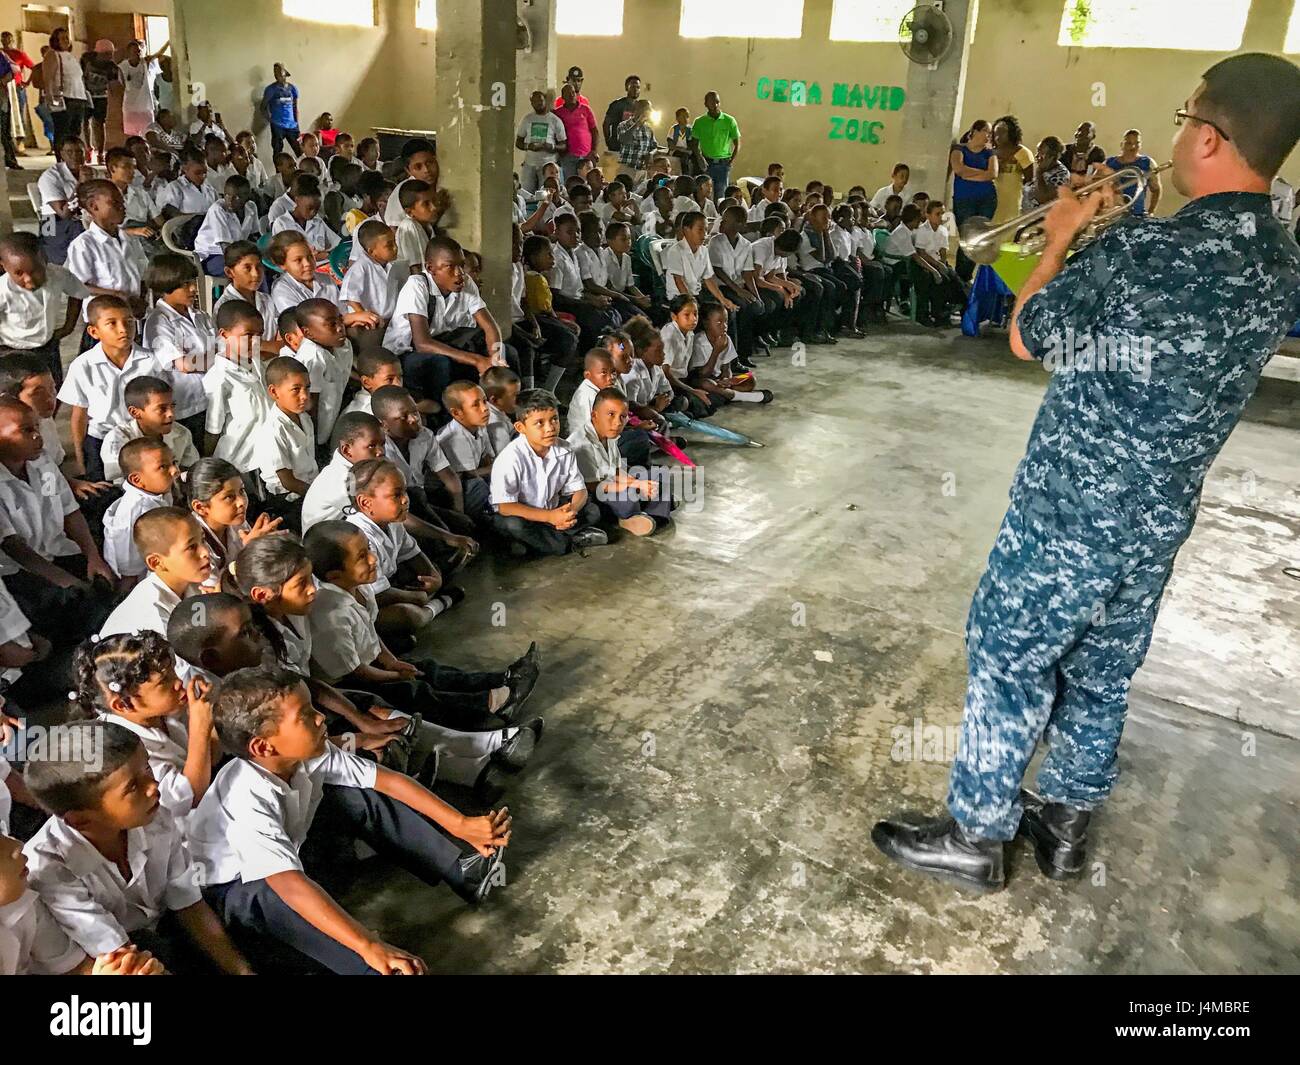 170222-N-YL073-002 SANTA FE, Honduras (Feb. 22, 2017) – Musician 2nd Class Matthew Kinnaman, a native of Phoenix assigned to the U.S. Fleet Forces (USFF) Band, Norfolk, Va., plays the trumpet for host nation school children in support of Continuing Promise 2017’s (CP-17) visit to Trujillo, Honduras. CP-17 is a U.S. Southern Command-sponsored and U.S. Naval Forces Southern Command/U.S. 4th Fleet-conducted deployment to conduct civil-military operations including humanitarian assistance, training engagements, and medical, dental, and veterinary support in an effort to show U.S. support and commi Stock Photo